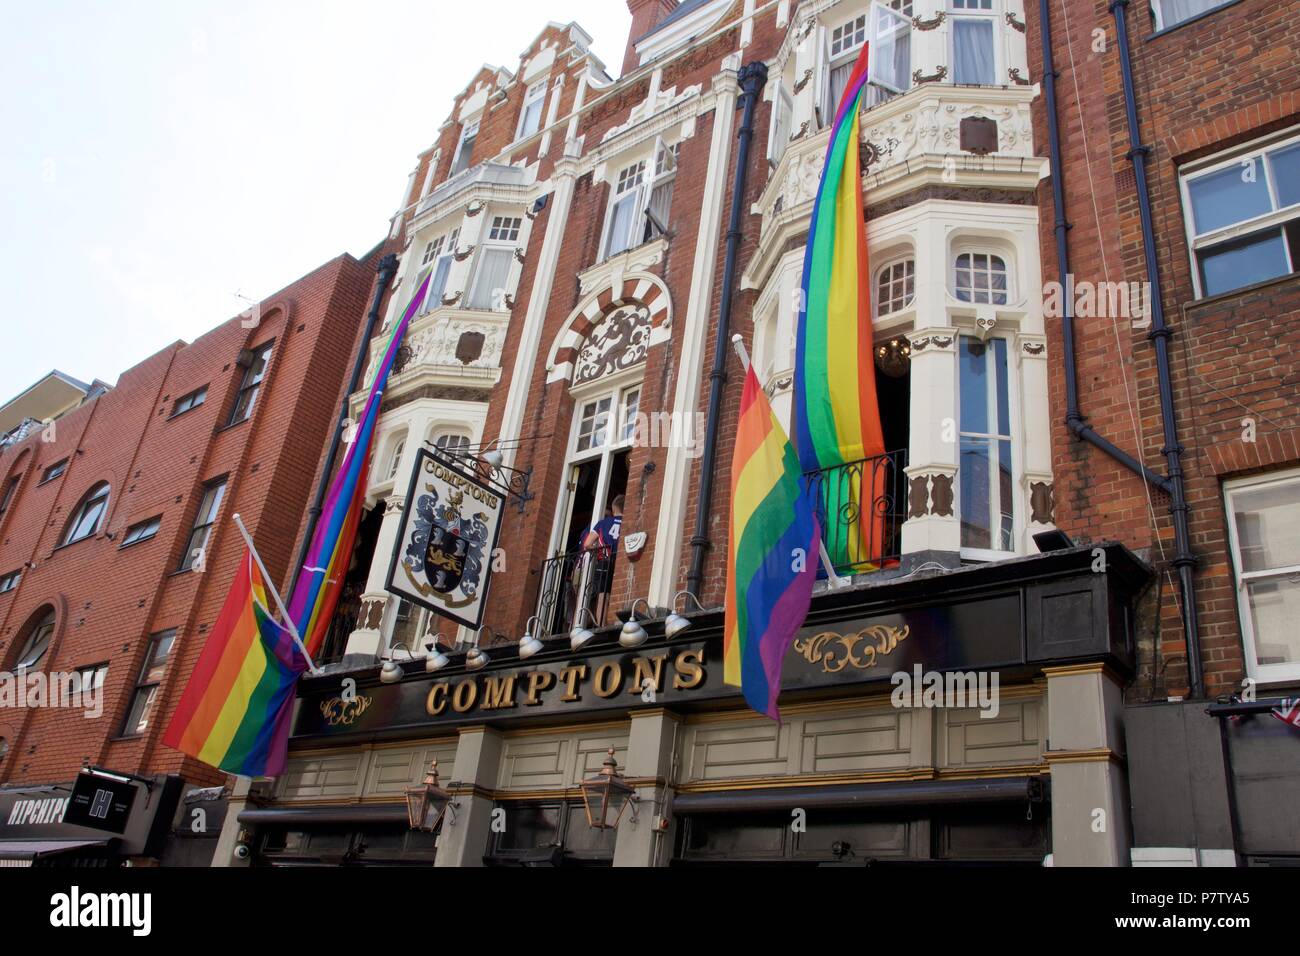 London, UK. 7th July 2018. Pride celebrations in London. A pub called Comptons on Old Compton Street, Soho displaying many rainbow flags to celebrate Pride of London 2018. Credit: Dimple Patel/Alamy Live News Stock Photo